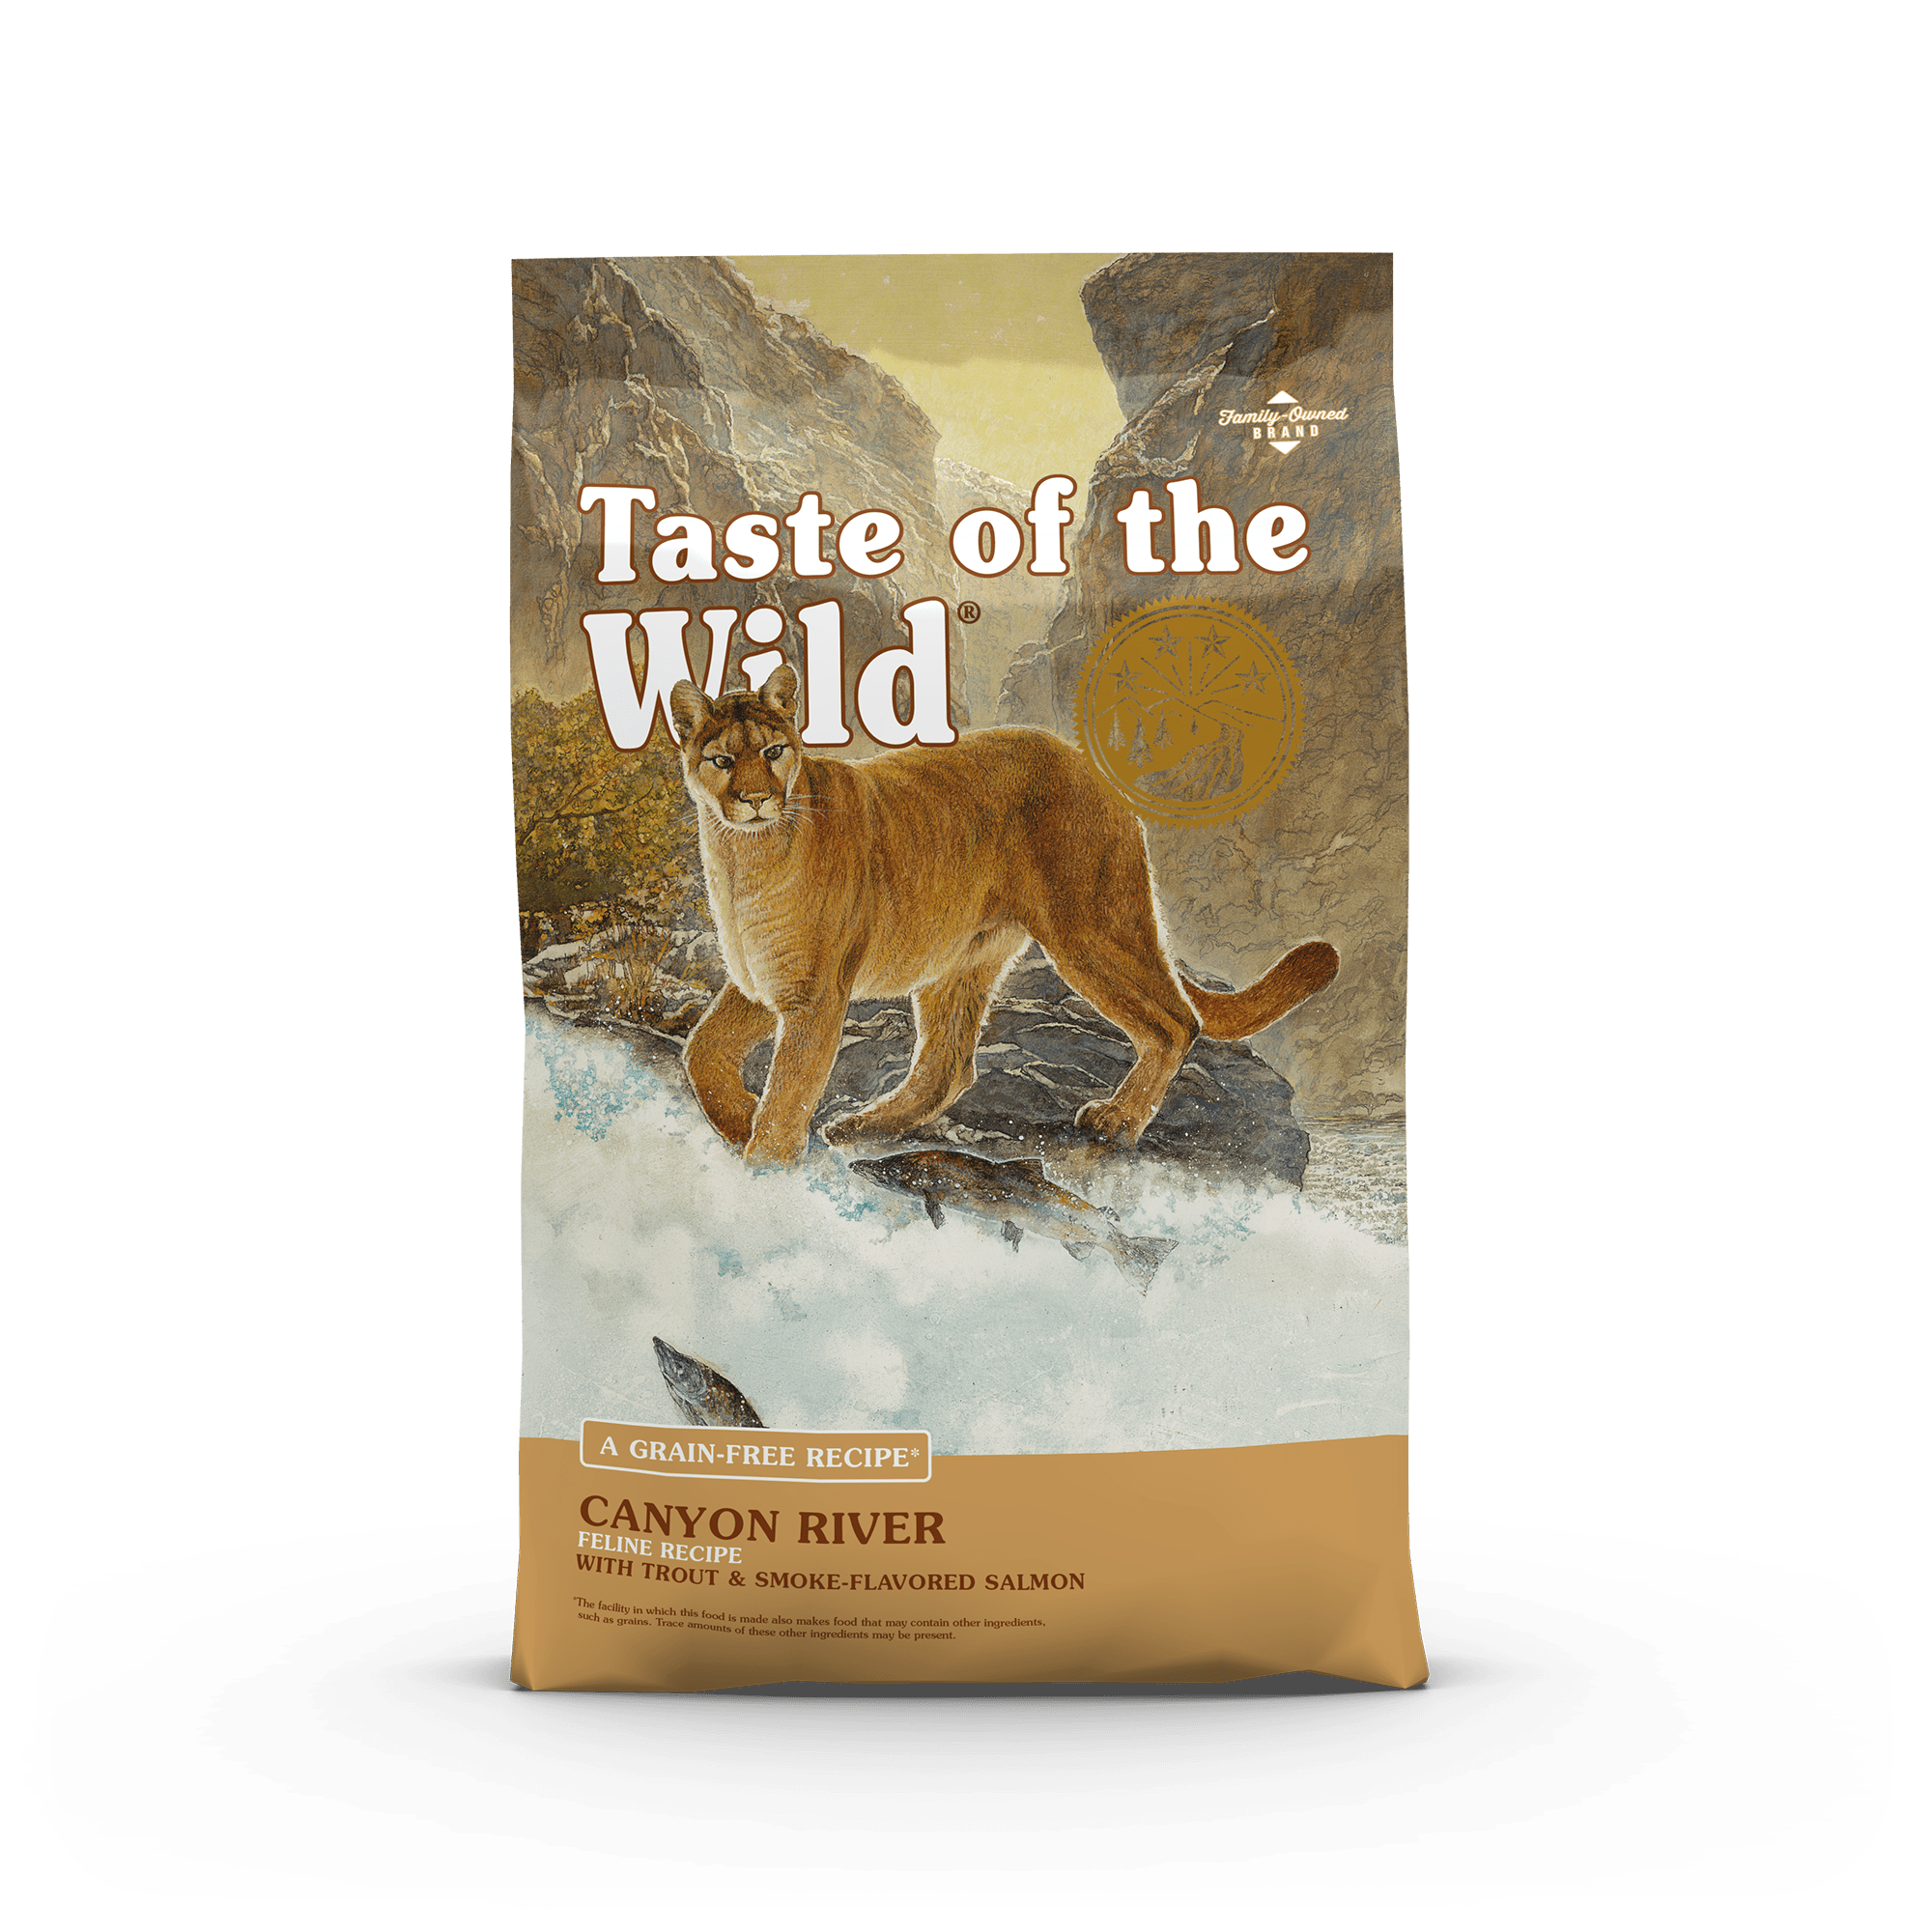 The front of a bag of Canyon River Feline Recipe with Trout and Smoke-Flavored Salmon. Image